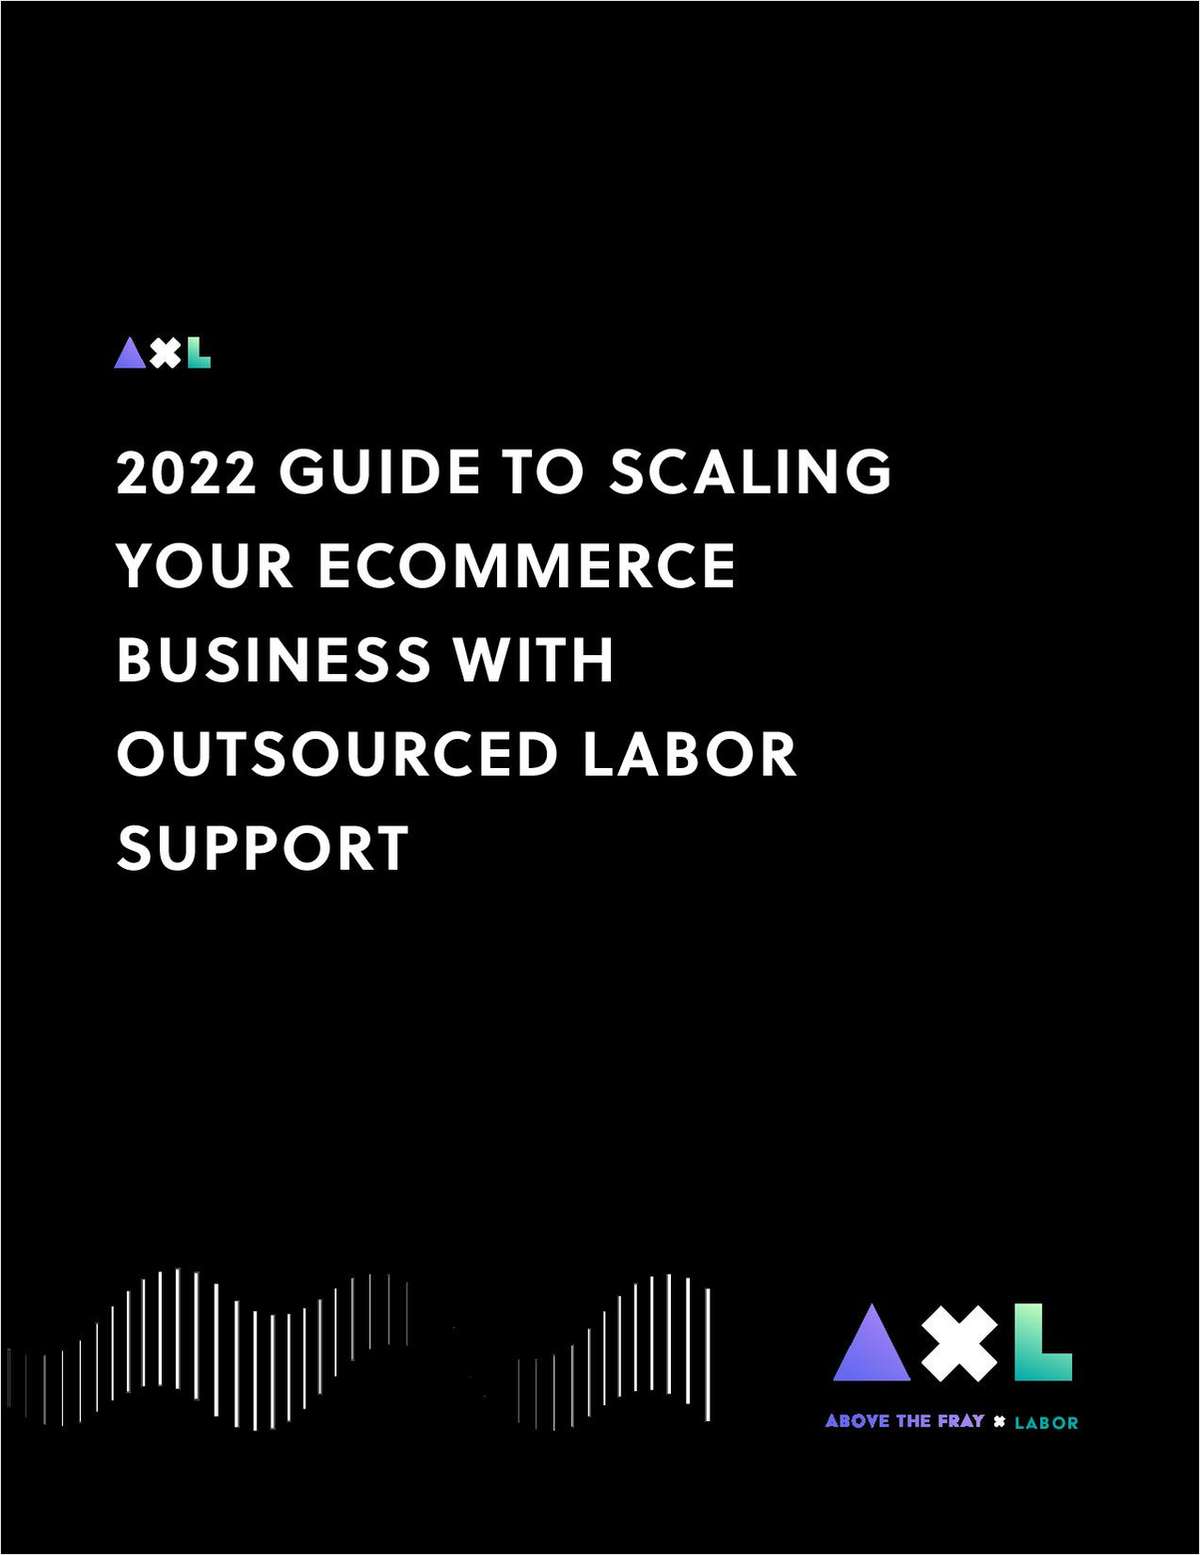 2022 Guide to Scaling Your Ecommerce Business with Outsourced Labor Support